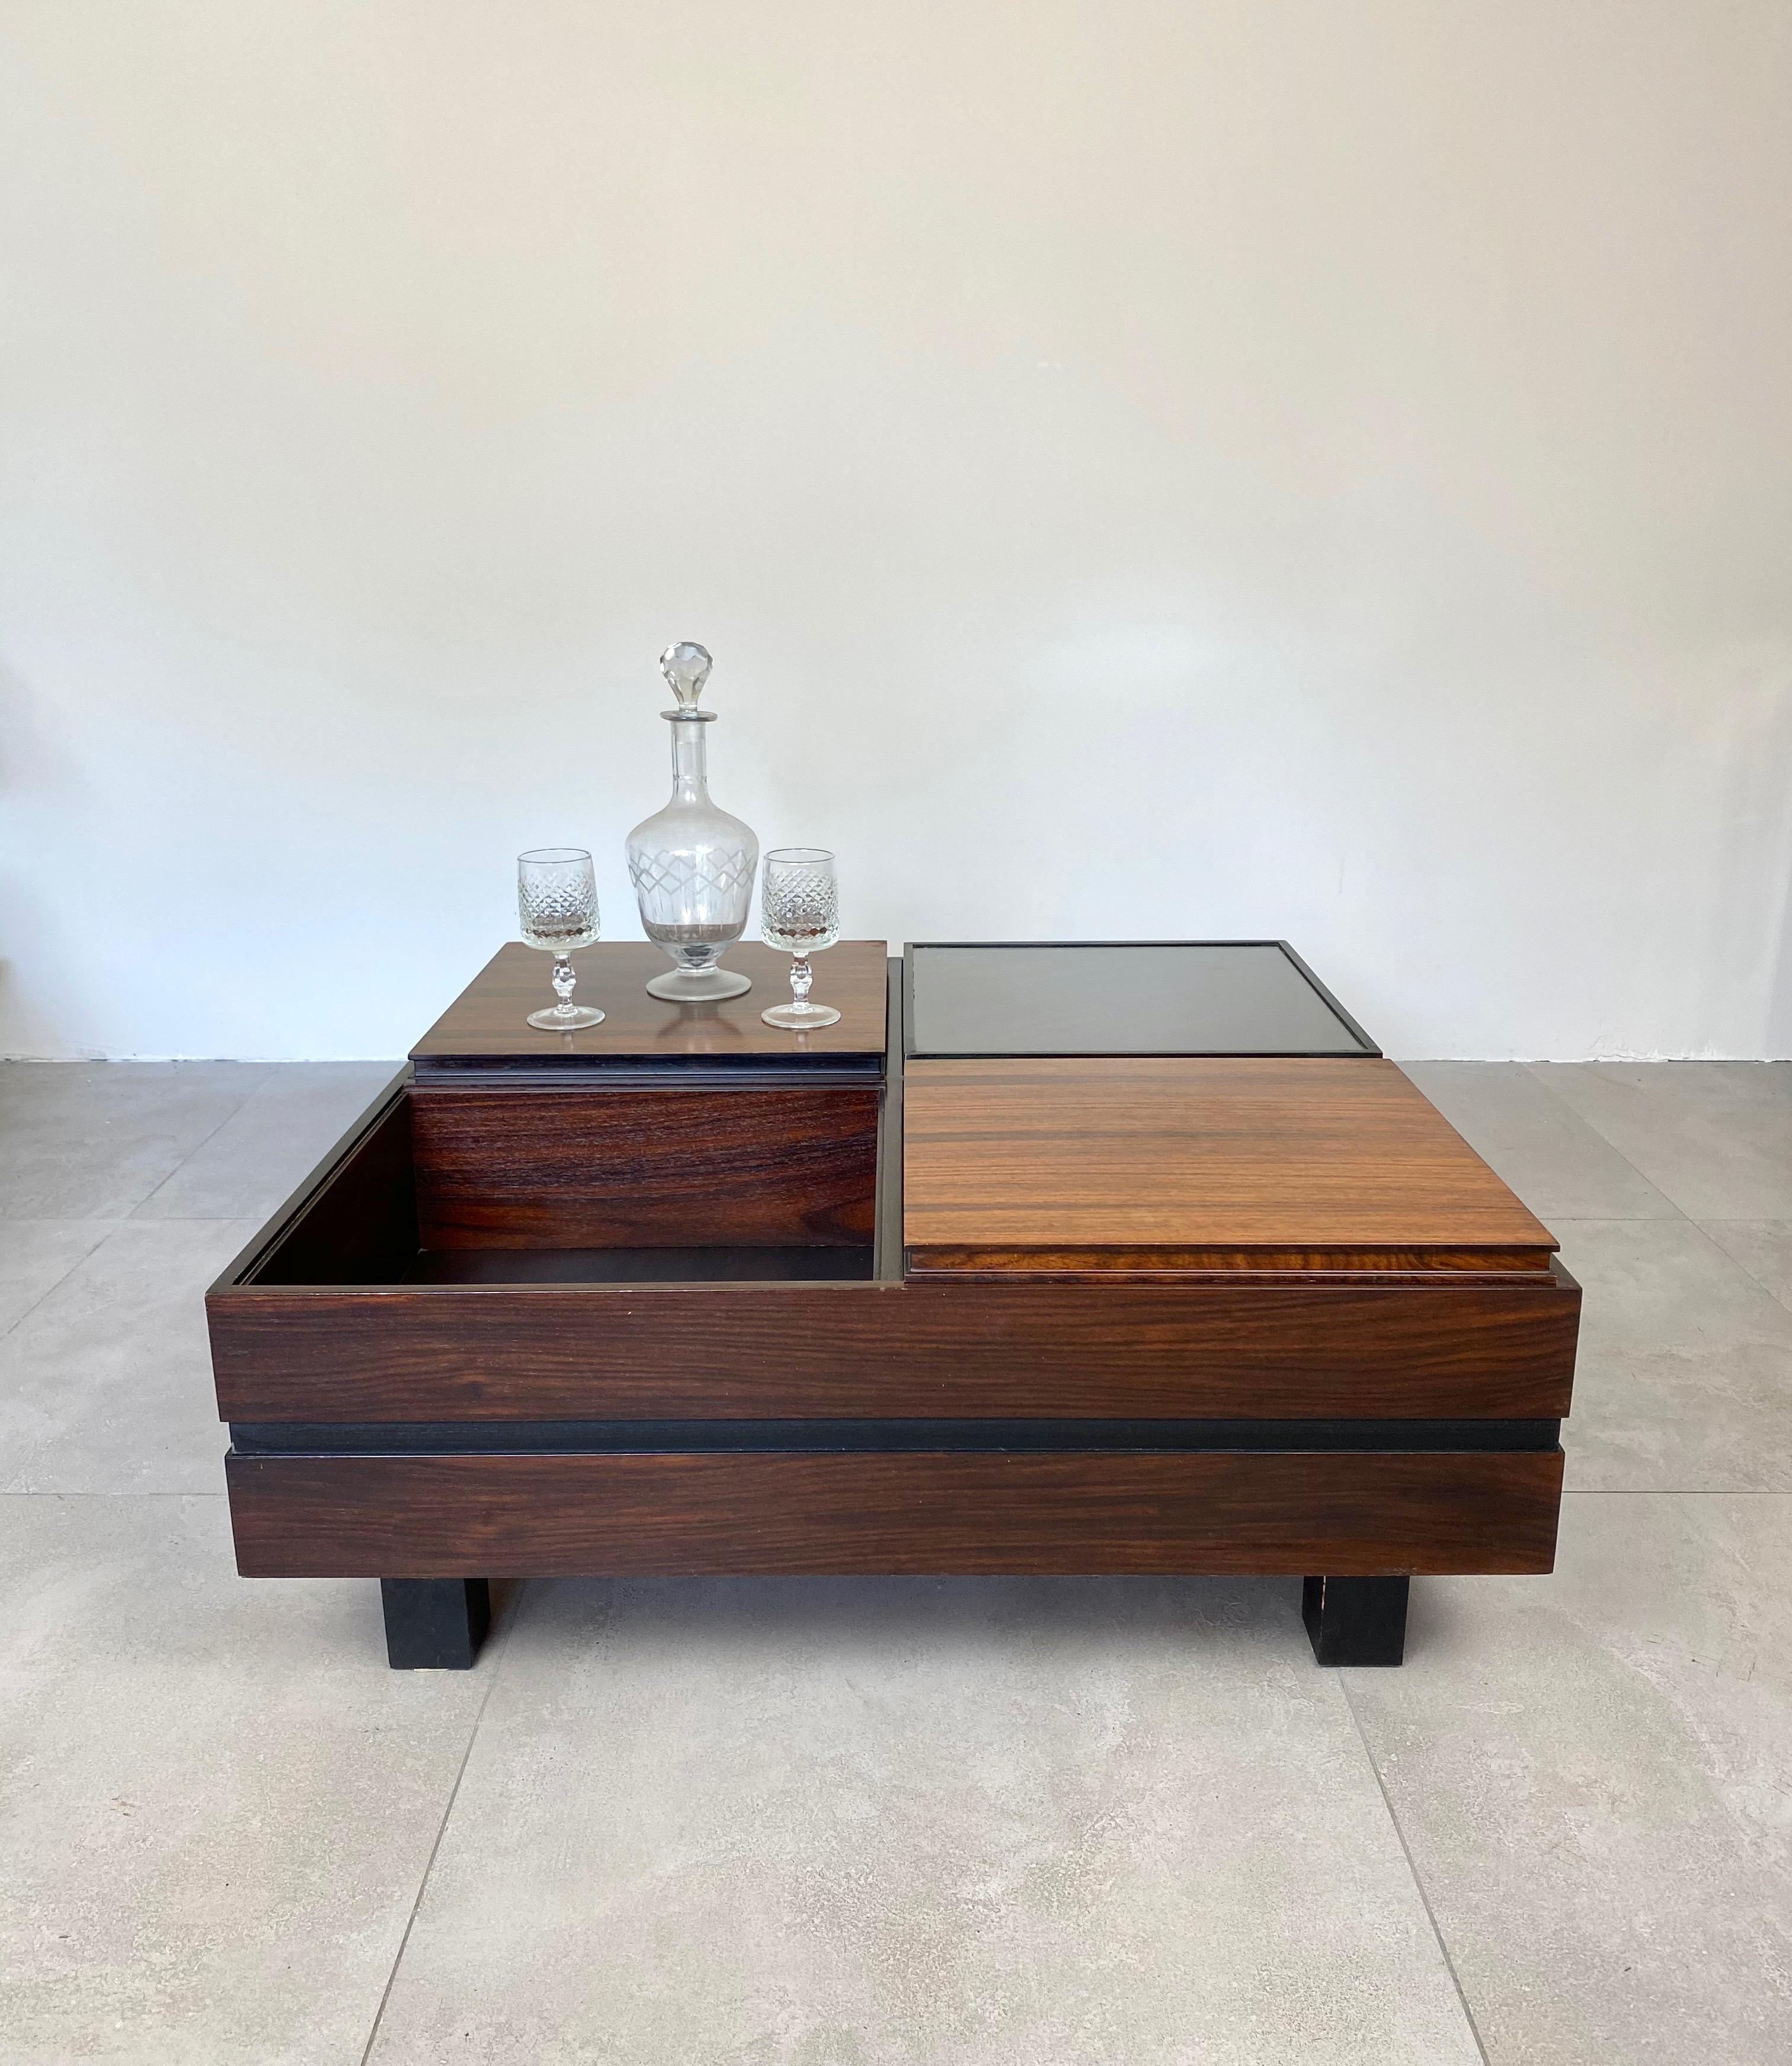 Mid-20th Century Luigi Sormani Square Modular Coffee Table in Wood, Italy, 1960s For Sale